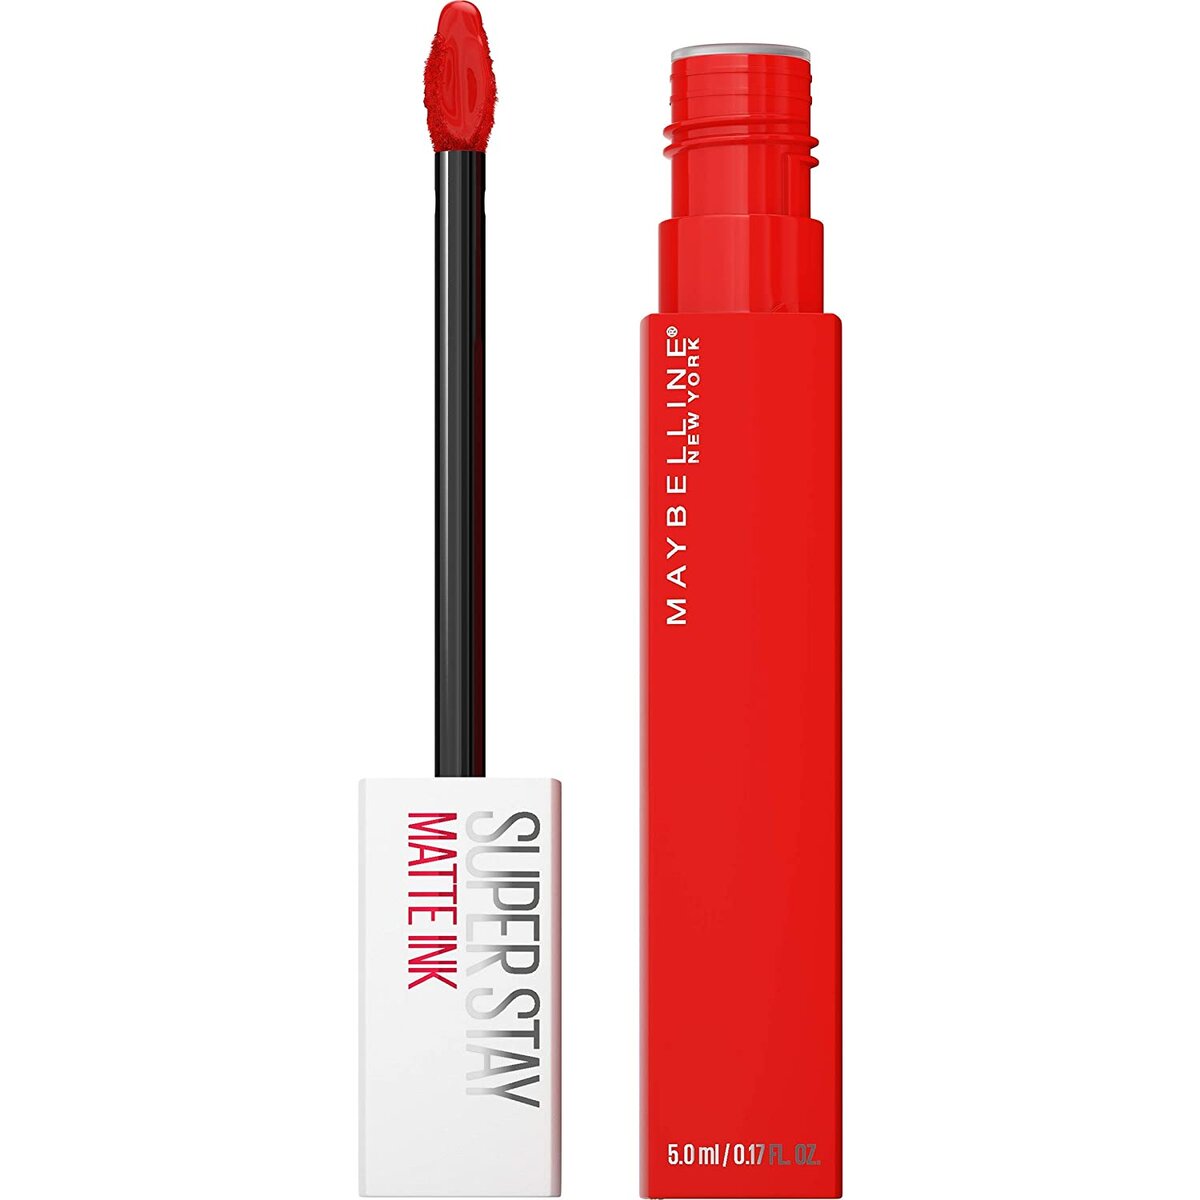 SUPERSTAY MATTE INK SPICED EDITION INDIVIDUALIST - MAYBELLINE